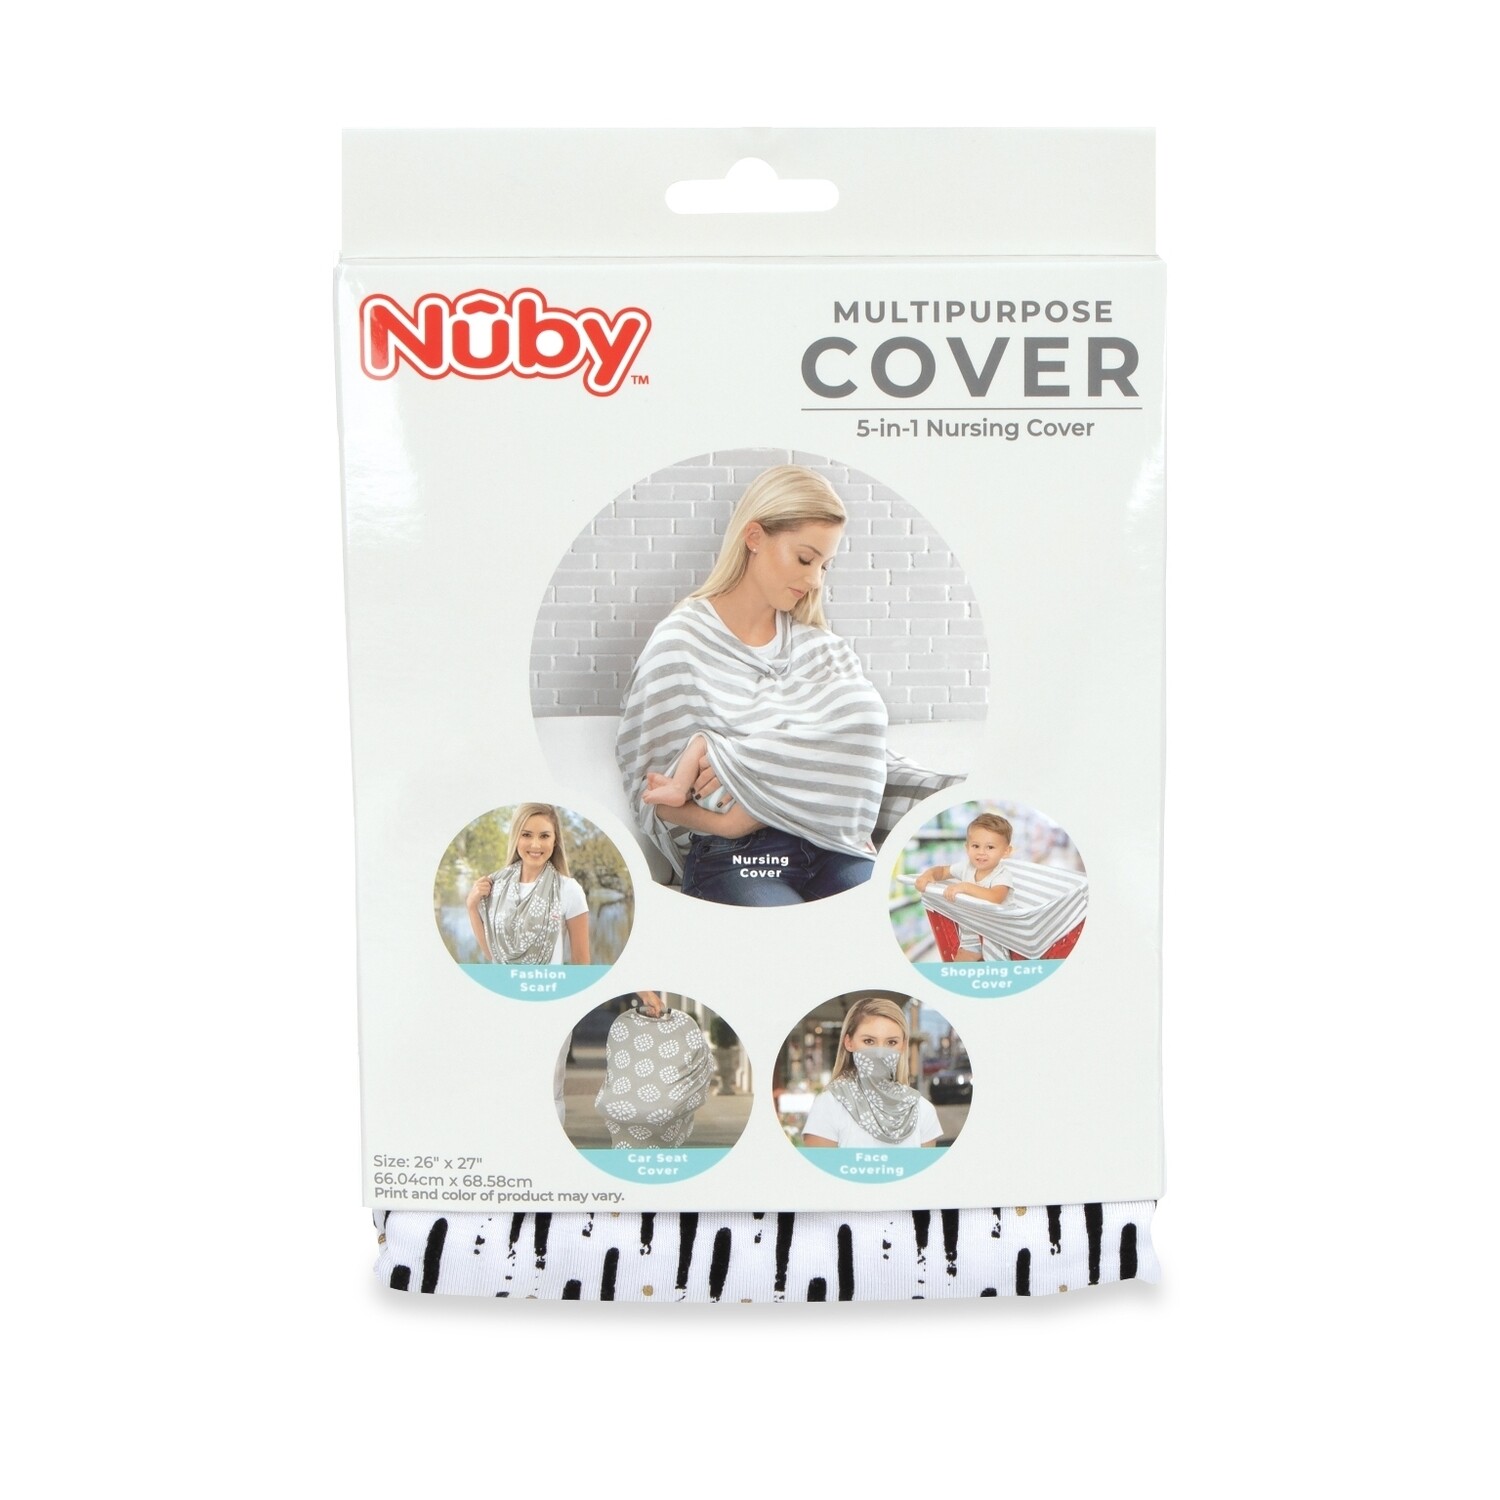 . Case of [24] Nuby On the Go Nursing Covers - Assorted Prints & Colors .